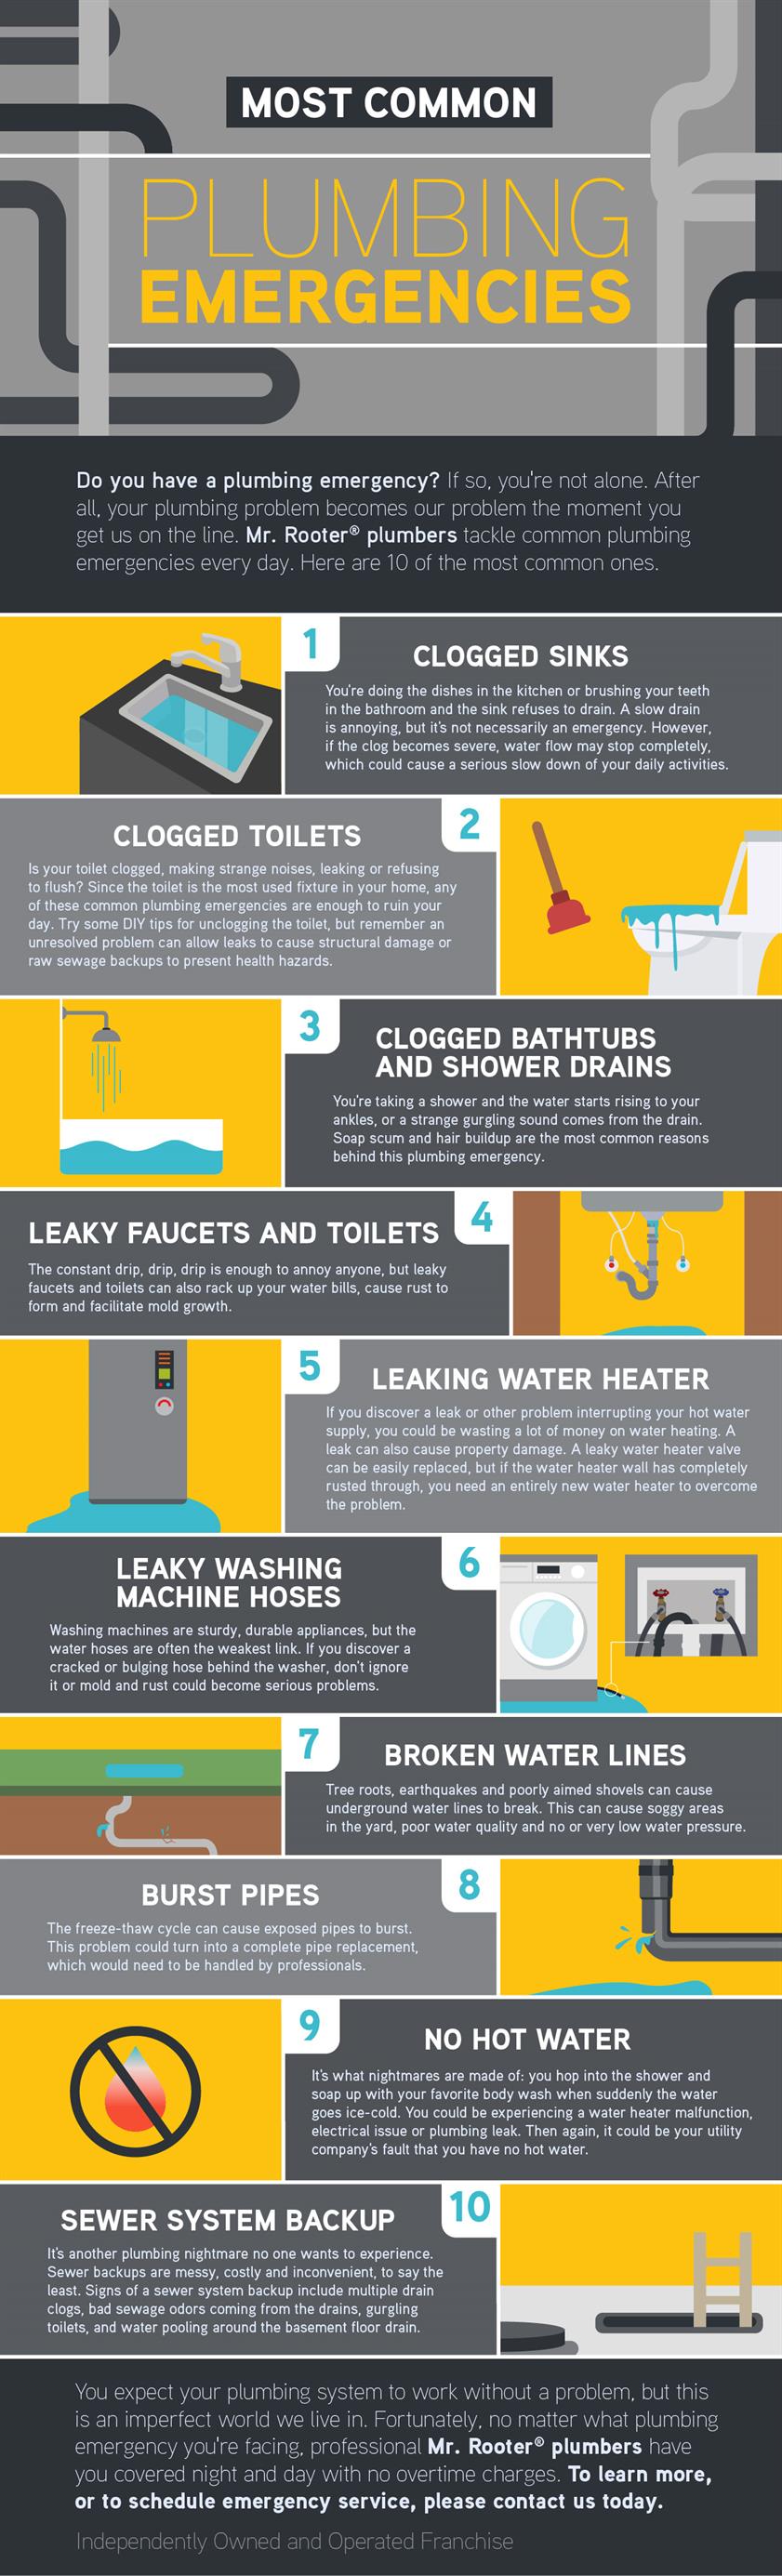 10 Common Plumbing Emergencies that Can Happen Anytime! - Infographic